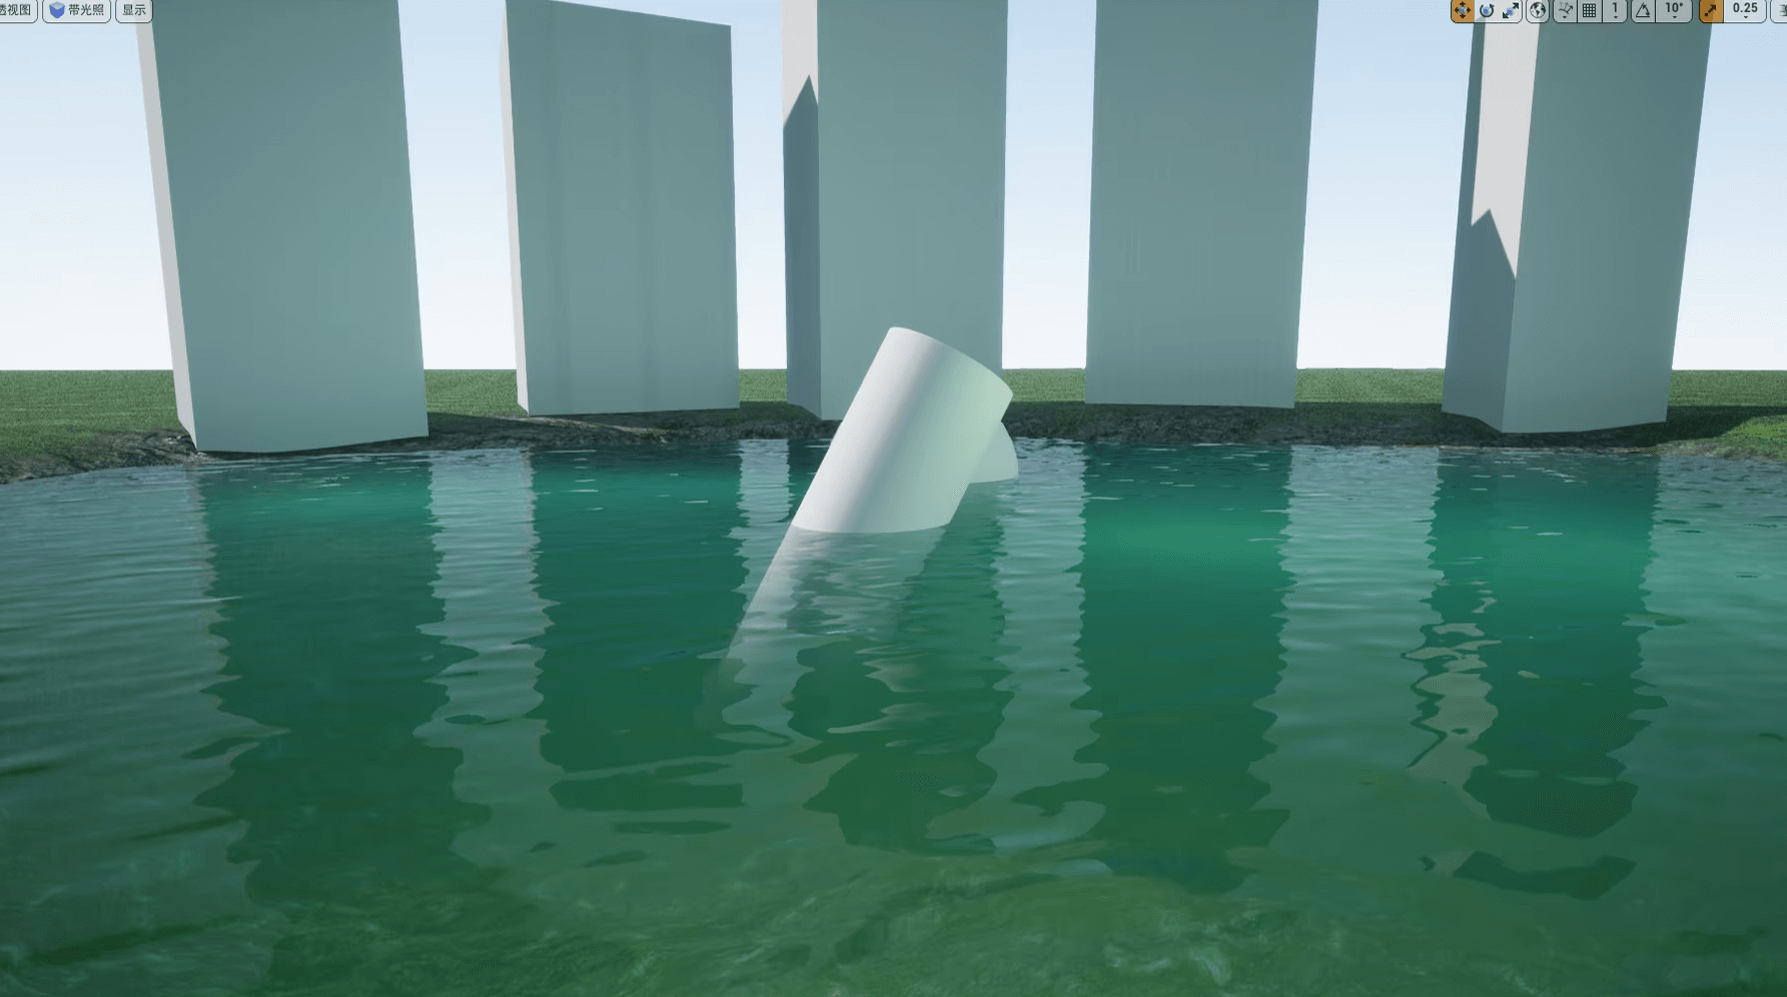 【UE4/5】动态水材质-RealDynamicWater_CreateAnyWater